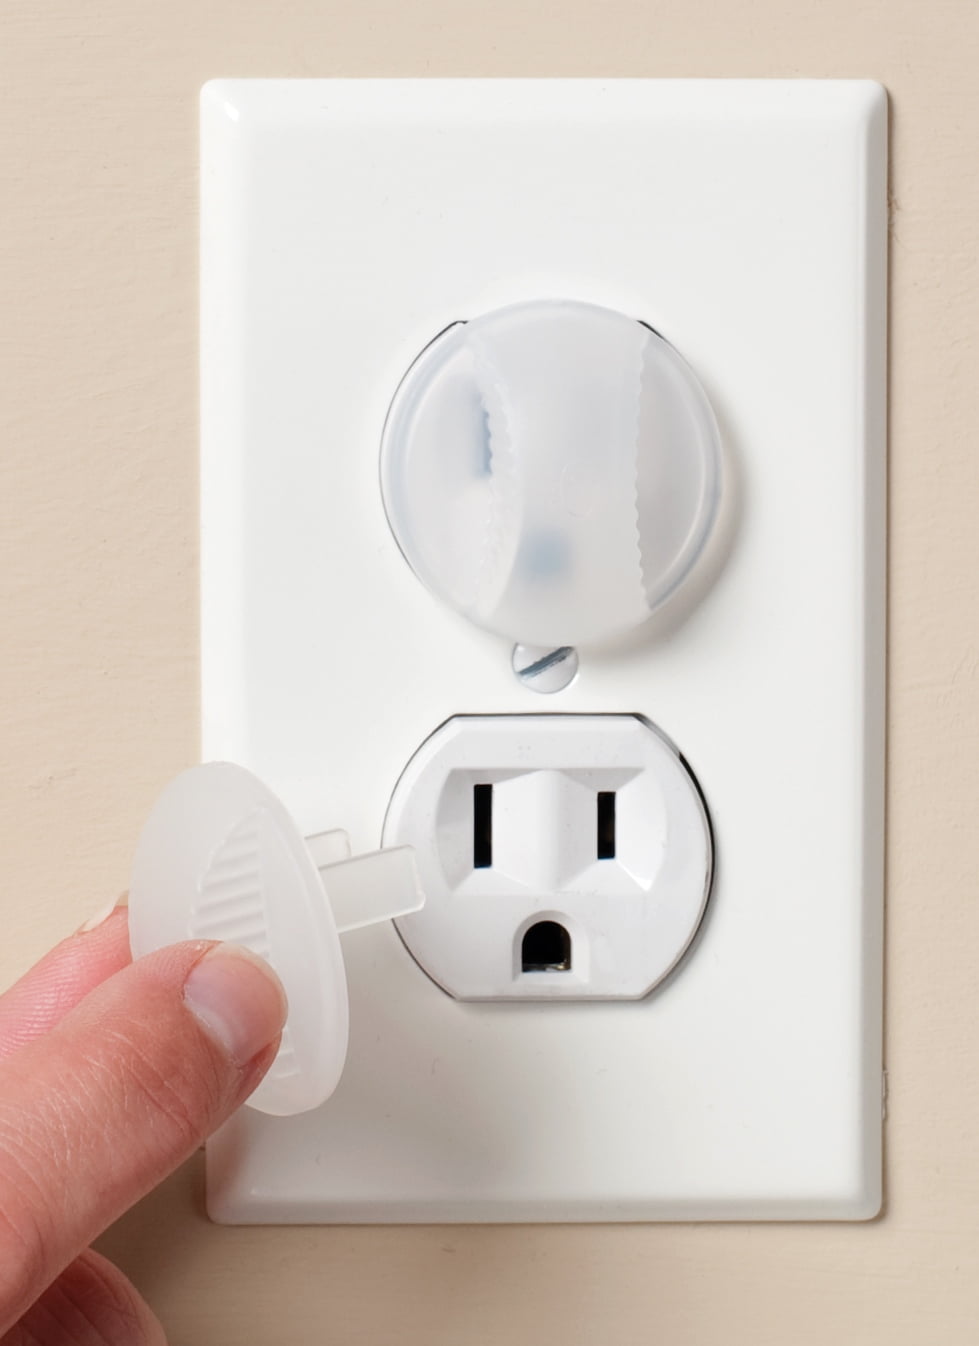 Electrical Outlet Child-Proof Safety Covers Kole Imports